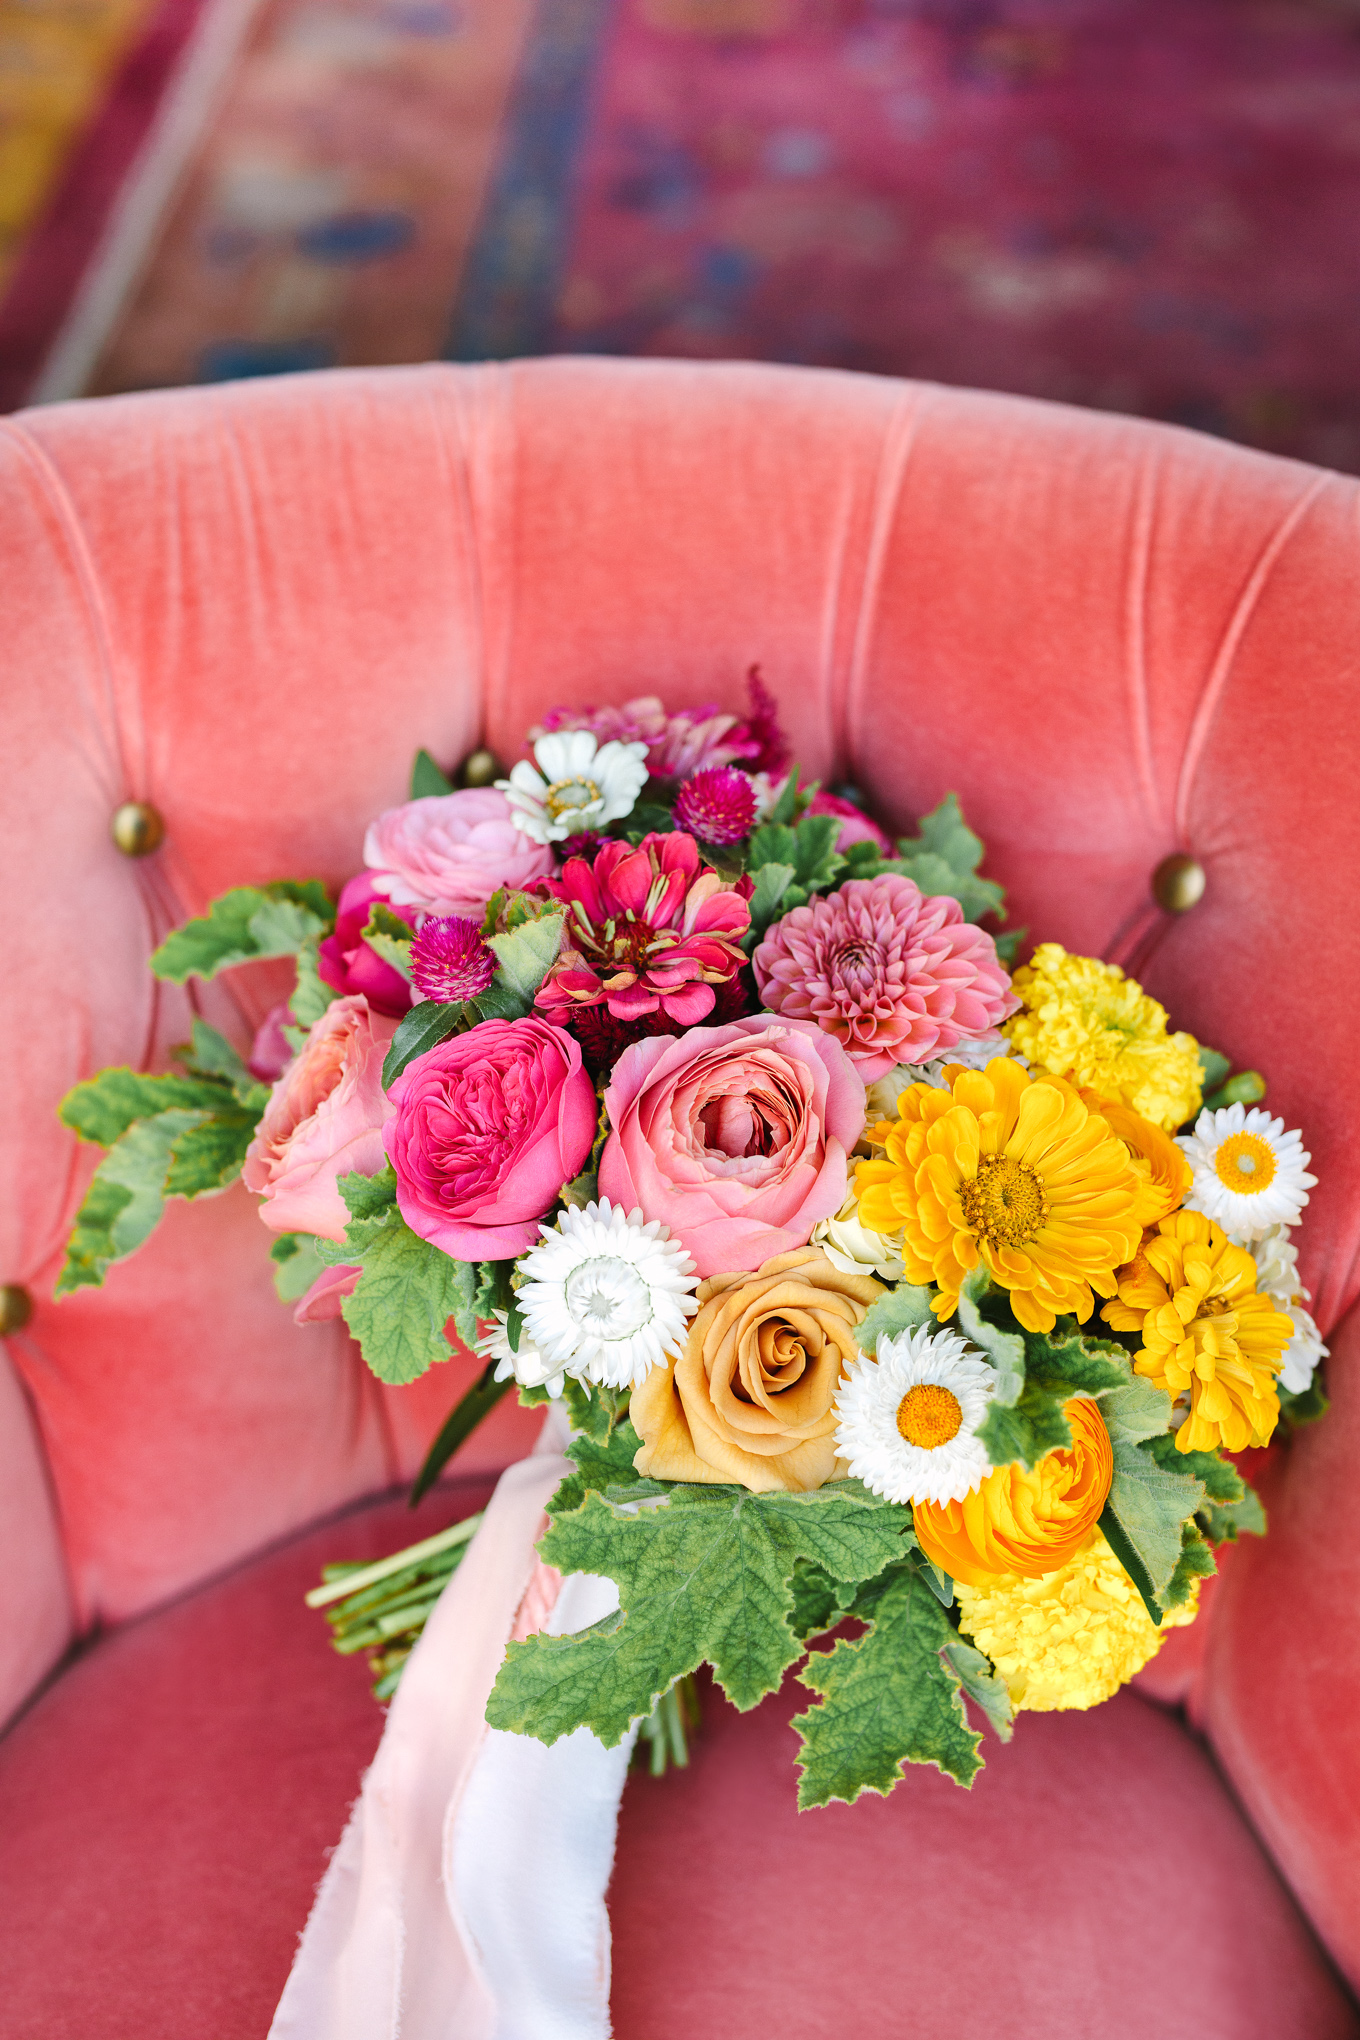 Ombre pink and yellow wedding flowers at The Fig House | Beautiful bridal bouquet inspiration and advice | Colorful and elevated wedding photography for fun-loving couples in Southern California | #weddingflowers #weddingbouquet #bridebouquet #bouquetideas #uniquebouquet   Source: Mary Costa Photography | Los Angeles